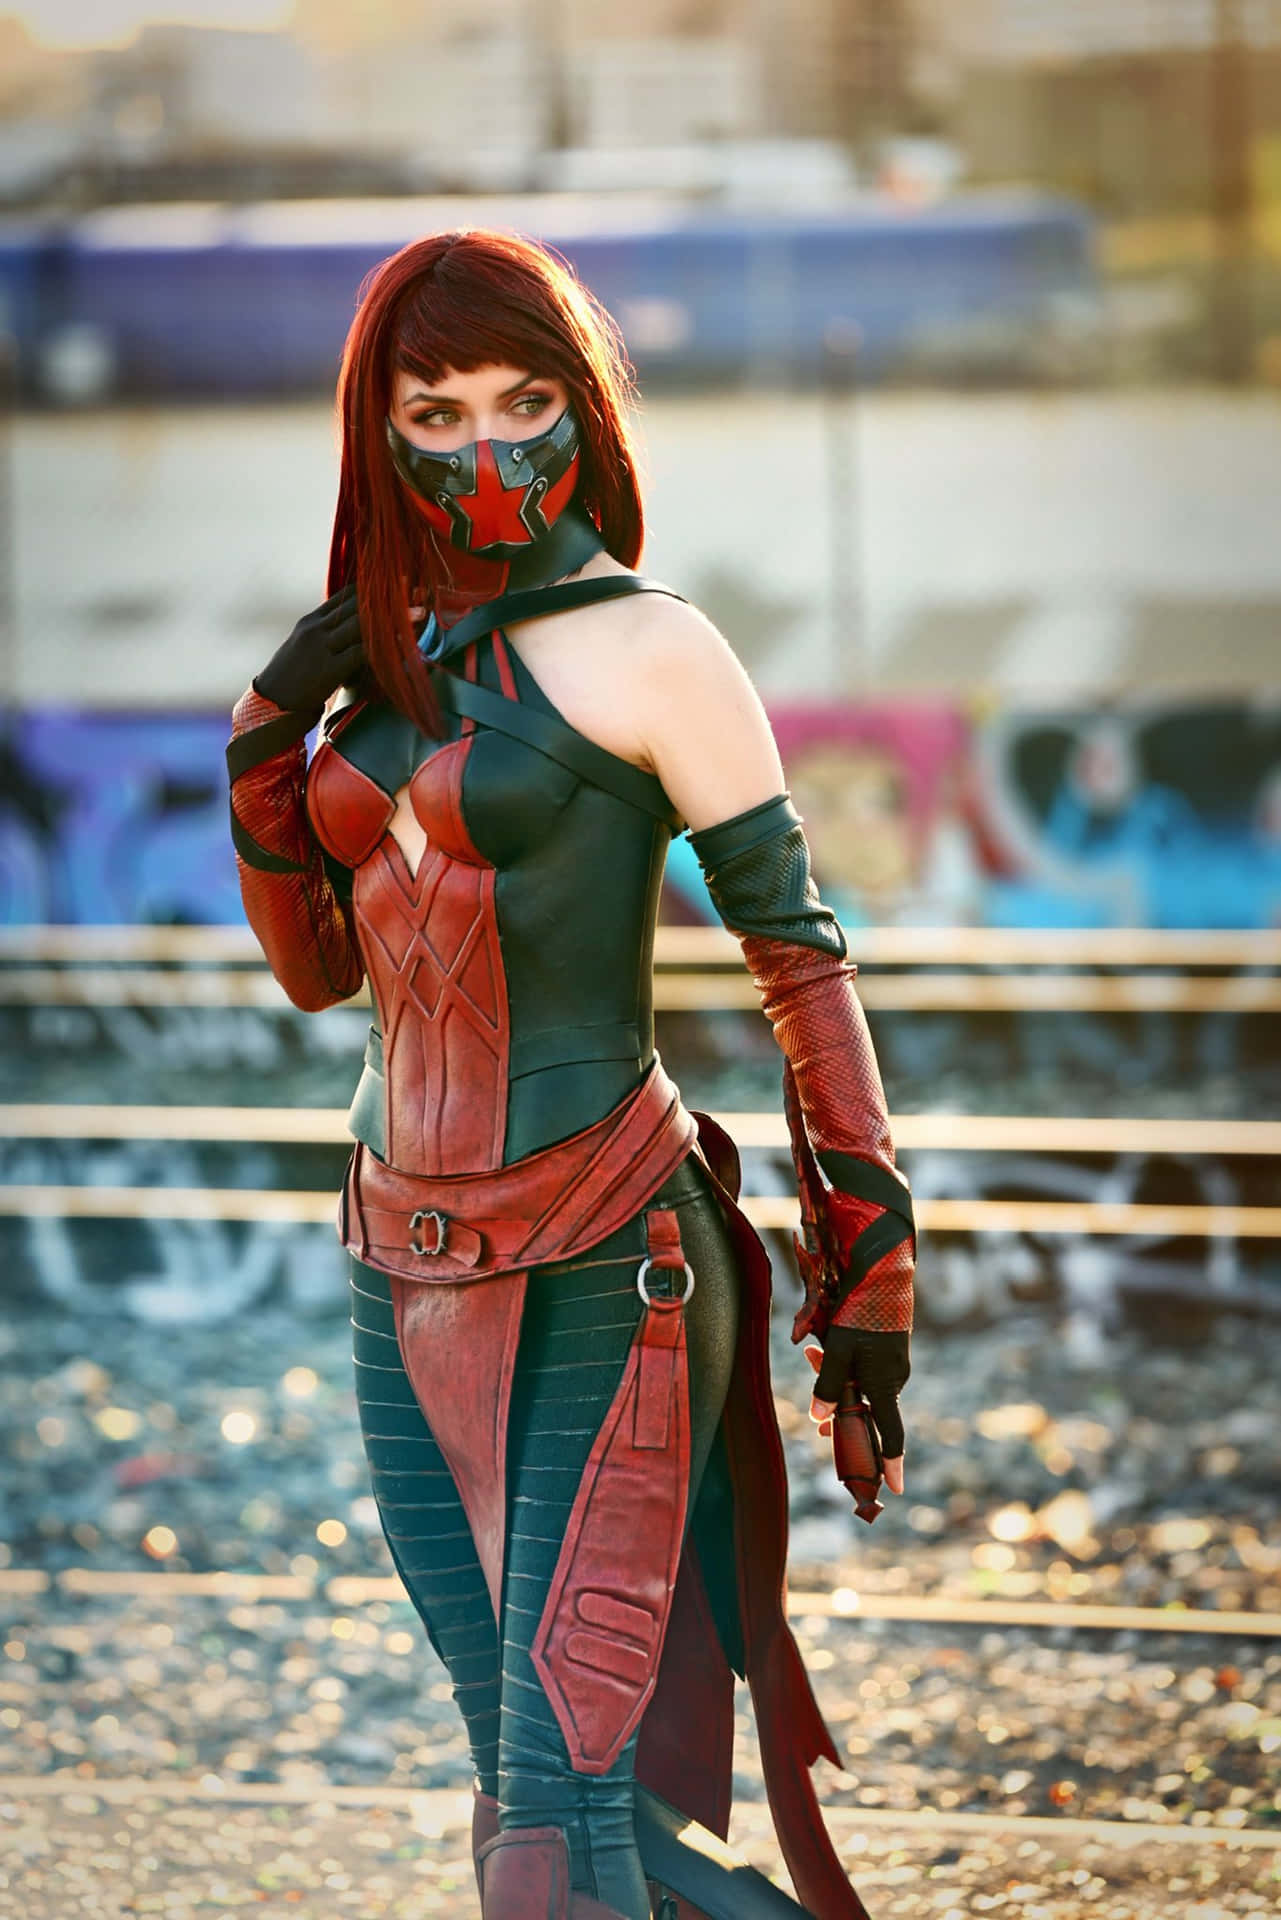 Stunning Mortal Kombat Characters Brought to Life in Cosplay Wallpaper